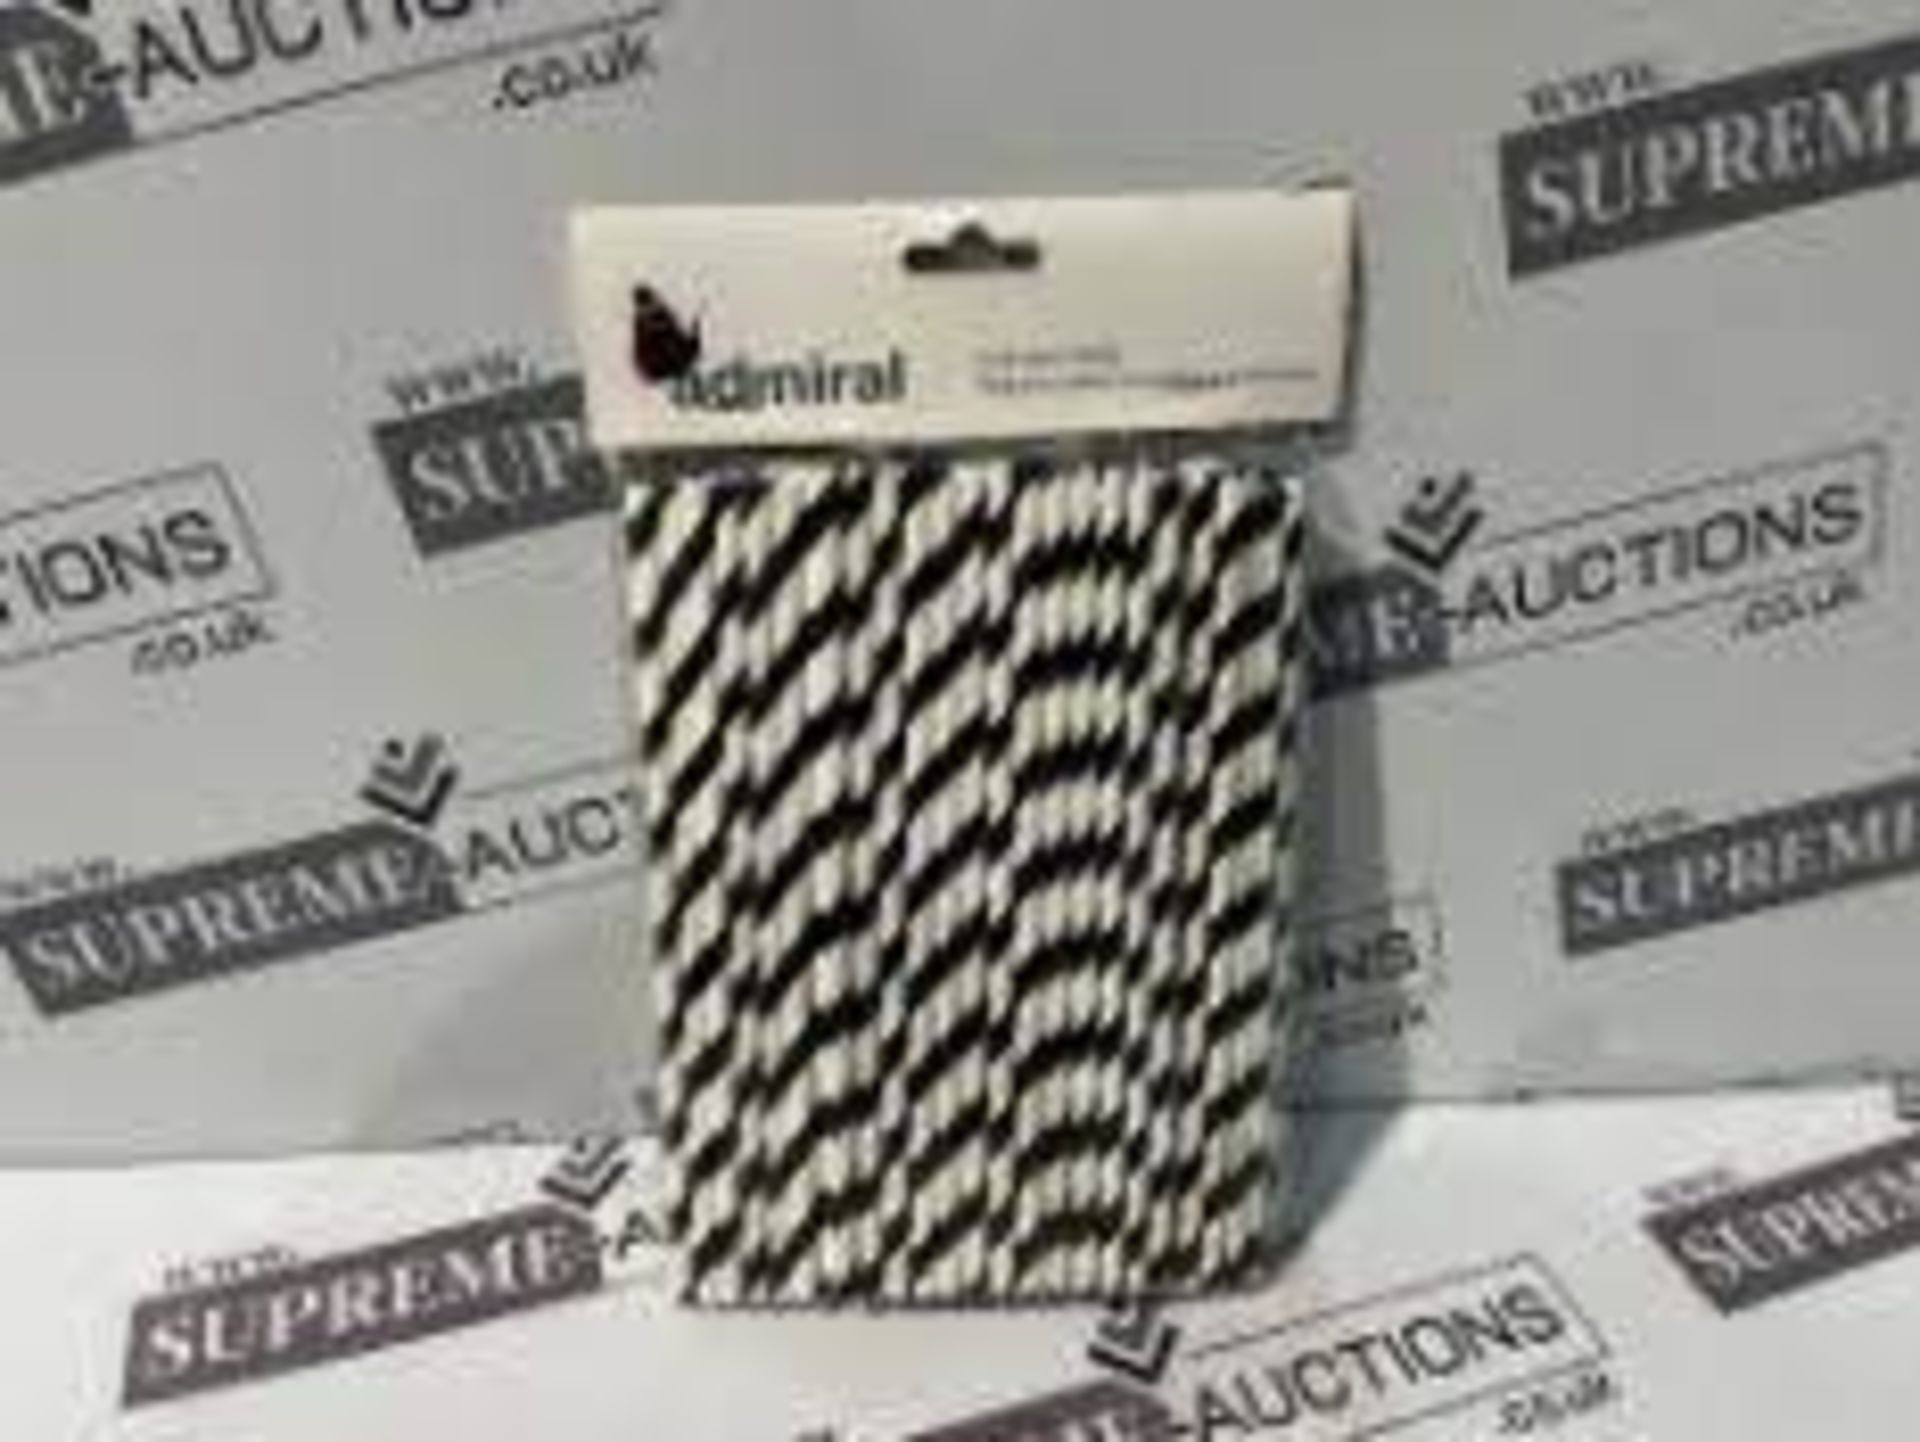 150 X BRAND NEW PACKS OF 100 ADMIRAL BLACK AND WHITE DRINKING STRAWS (ROW10)